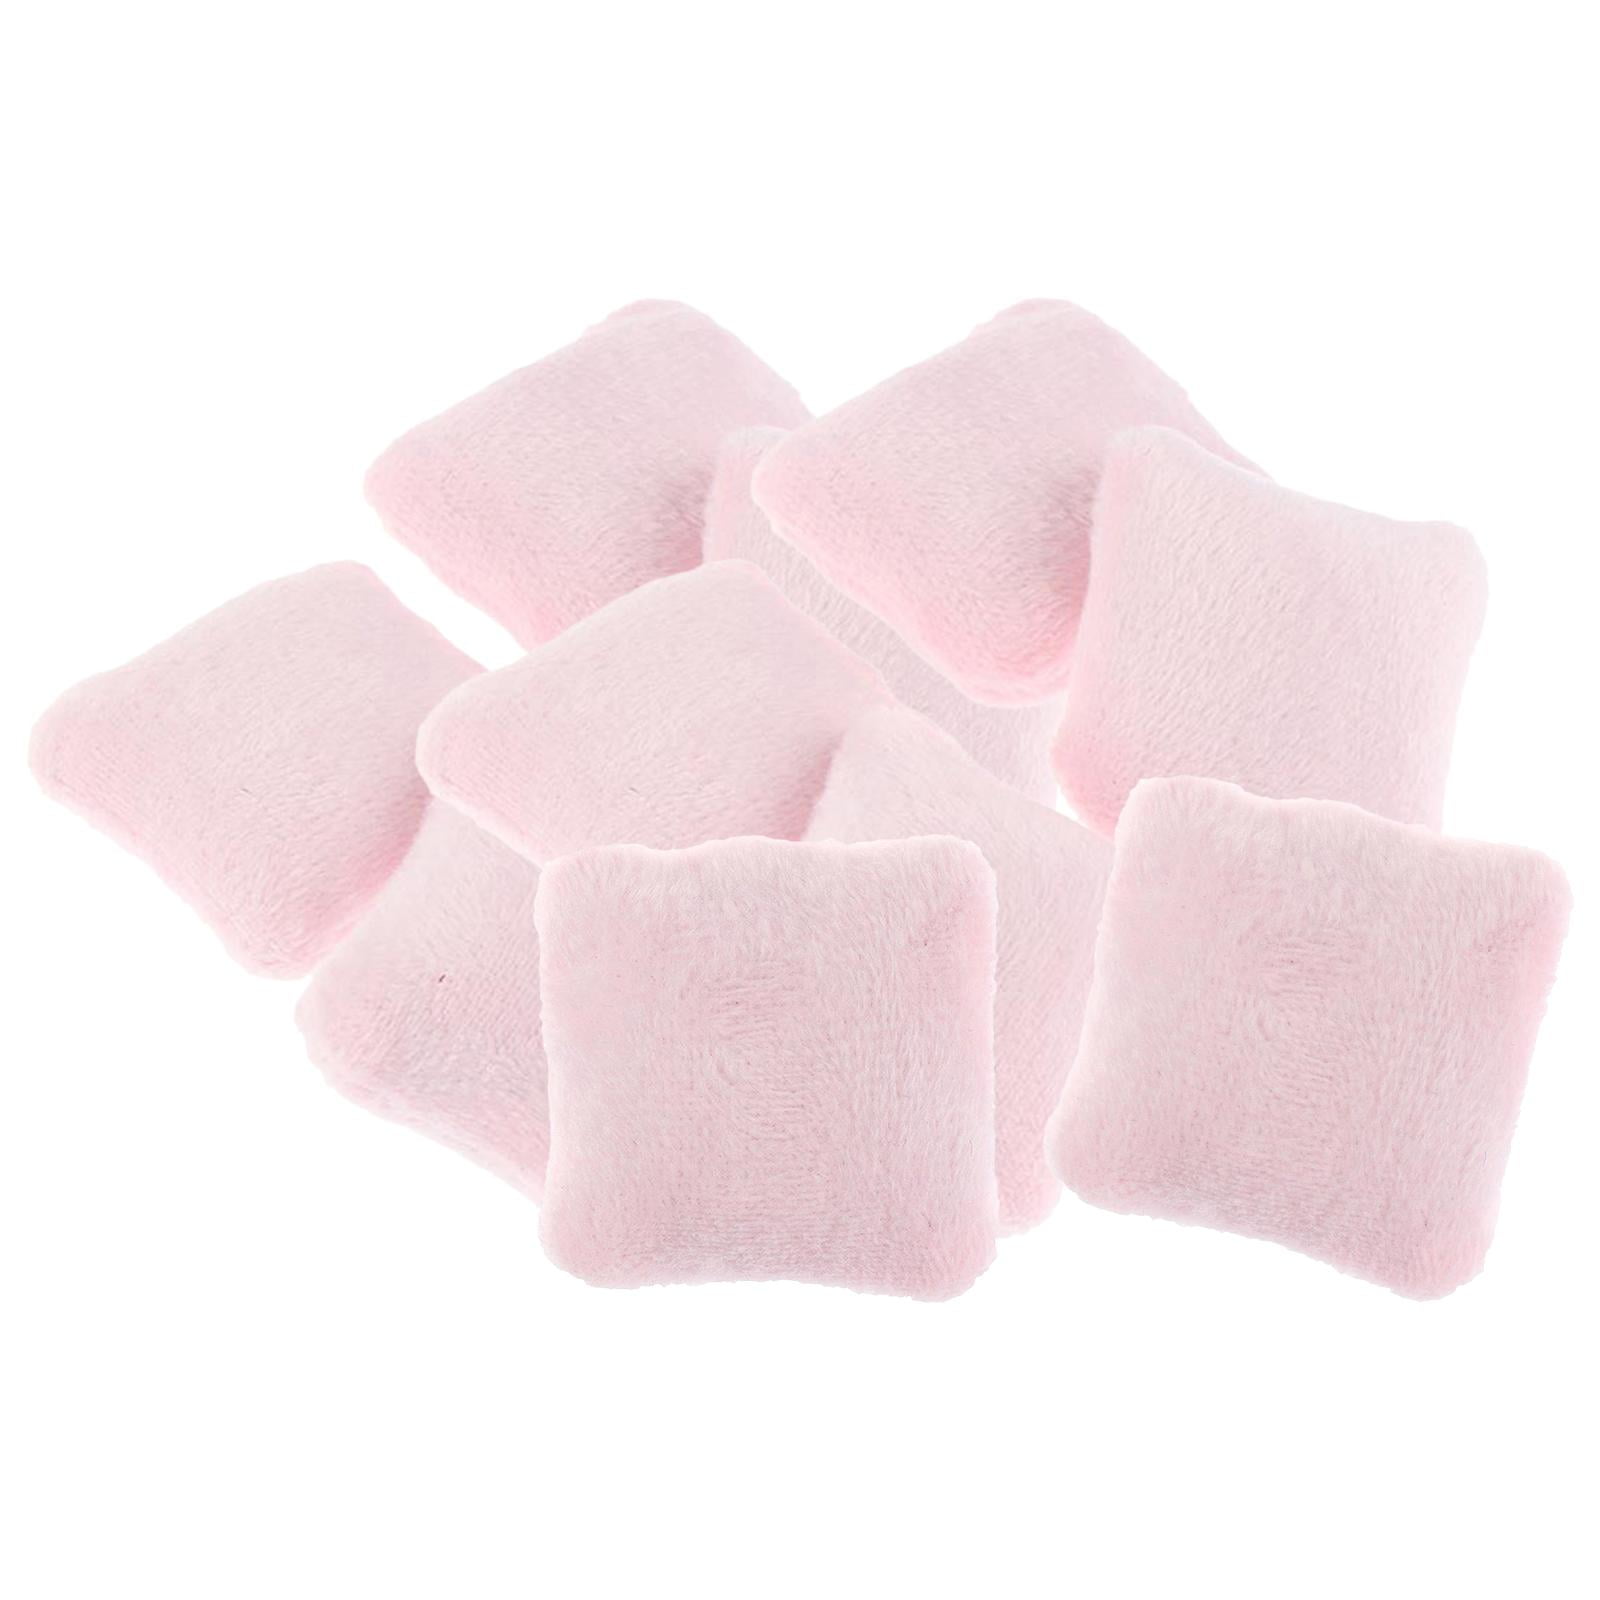 10pcs Pillow Cushions For Sofa Couch 1/12 Dollhouse Miniature 4x4cm Pink 